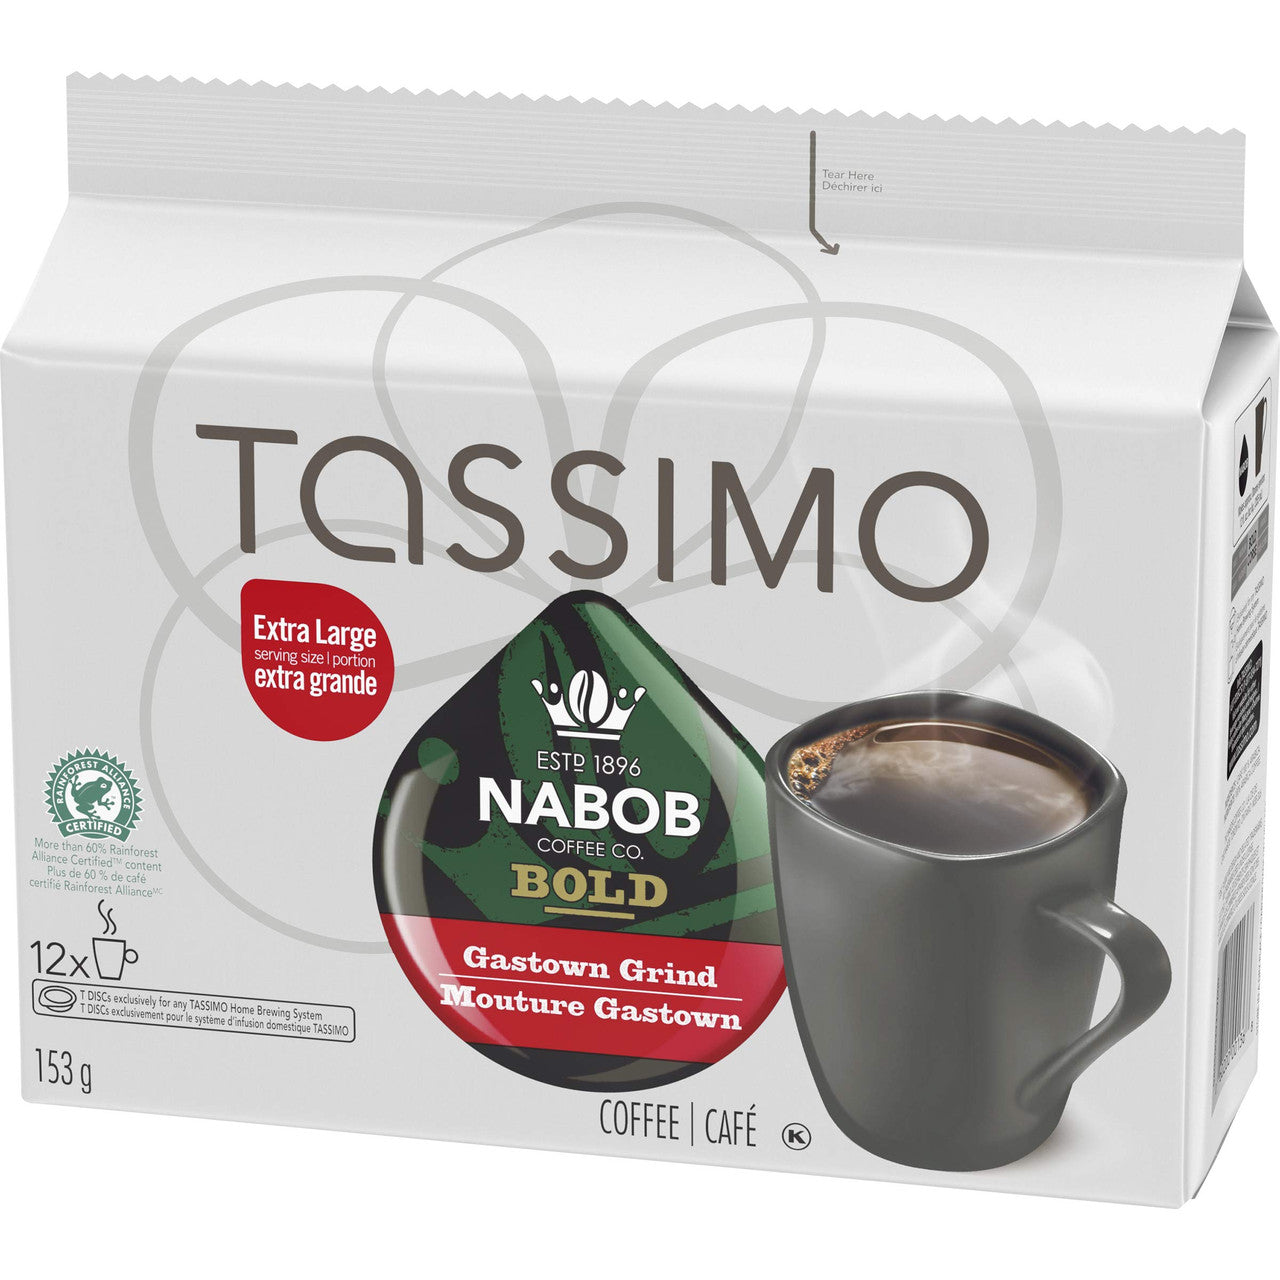 Tassimo Nabob Bold Gastown Grind Coffee 12 T-Discs, 153g/5.4oz, (3-Pack) {Imported from Canada}